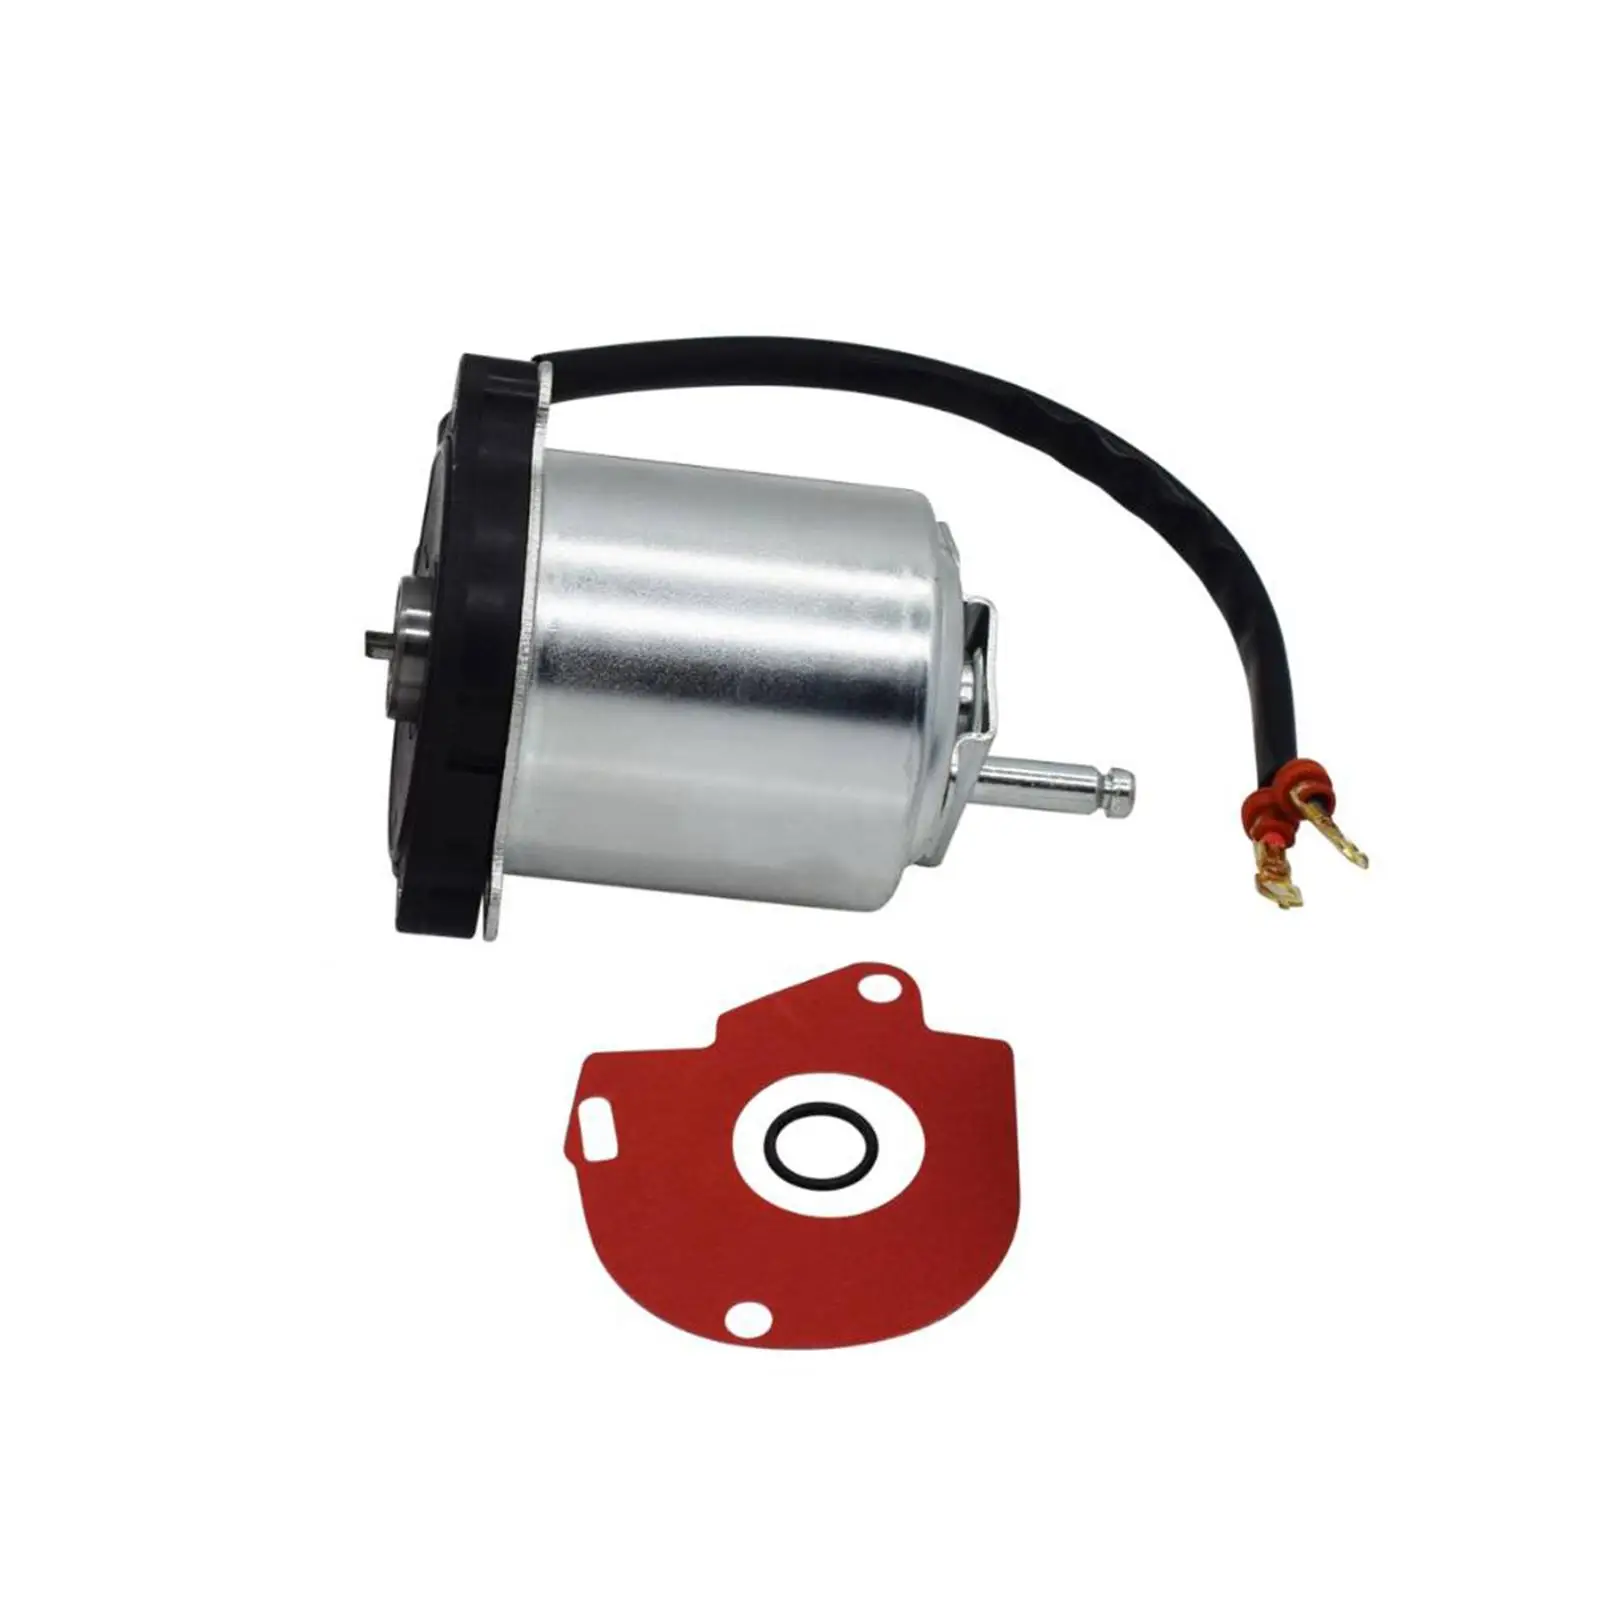 ABS Brake Booster Pump Motor Assembly 47960-60050 High Performance Replace Parts for Toyota FJ Cruiser LX570 Gx460 LX450D